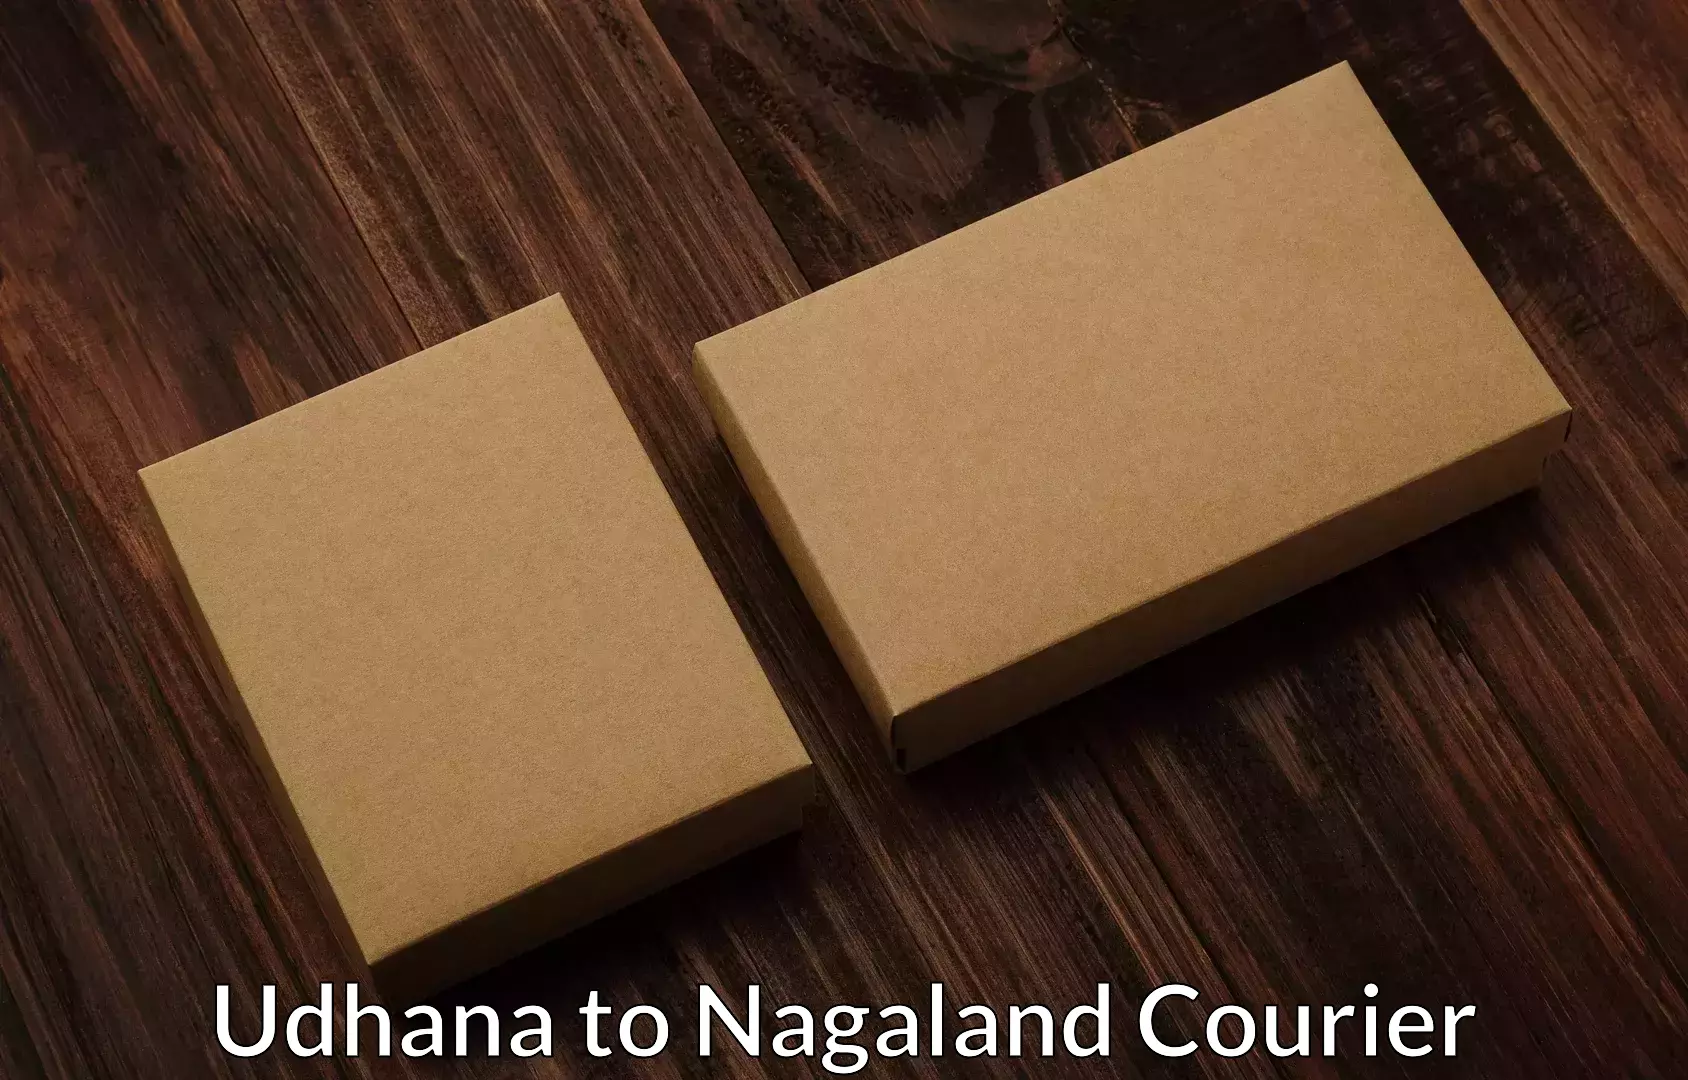 Full-service relocation in Udhana to Nagaland